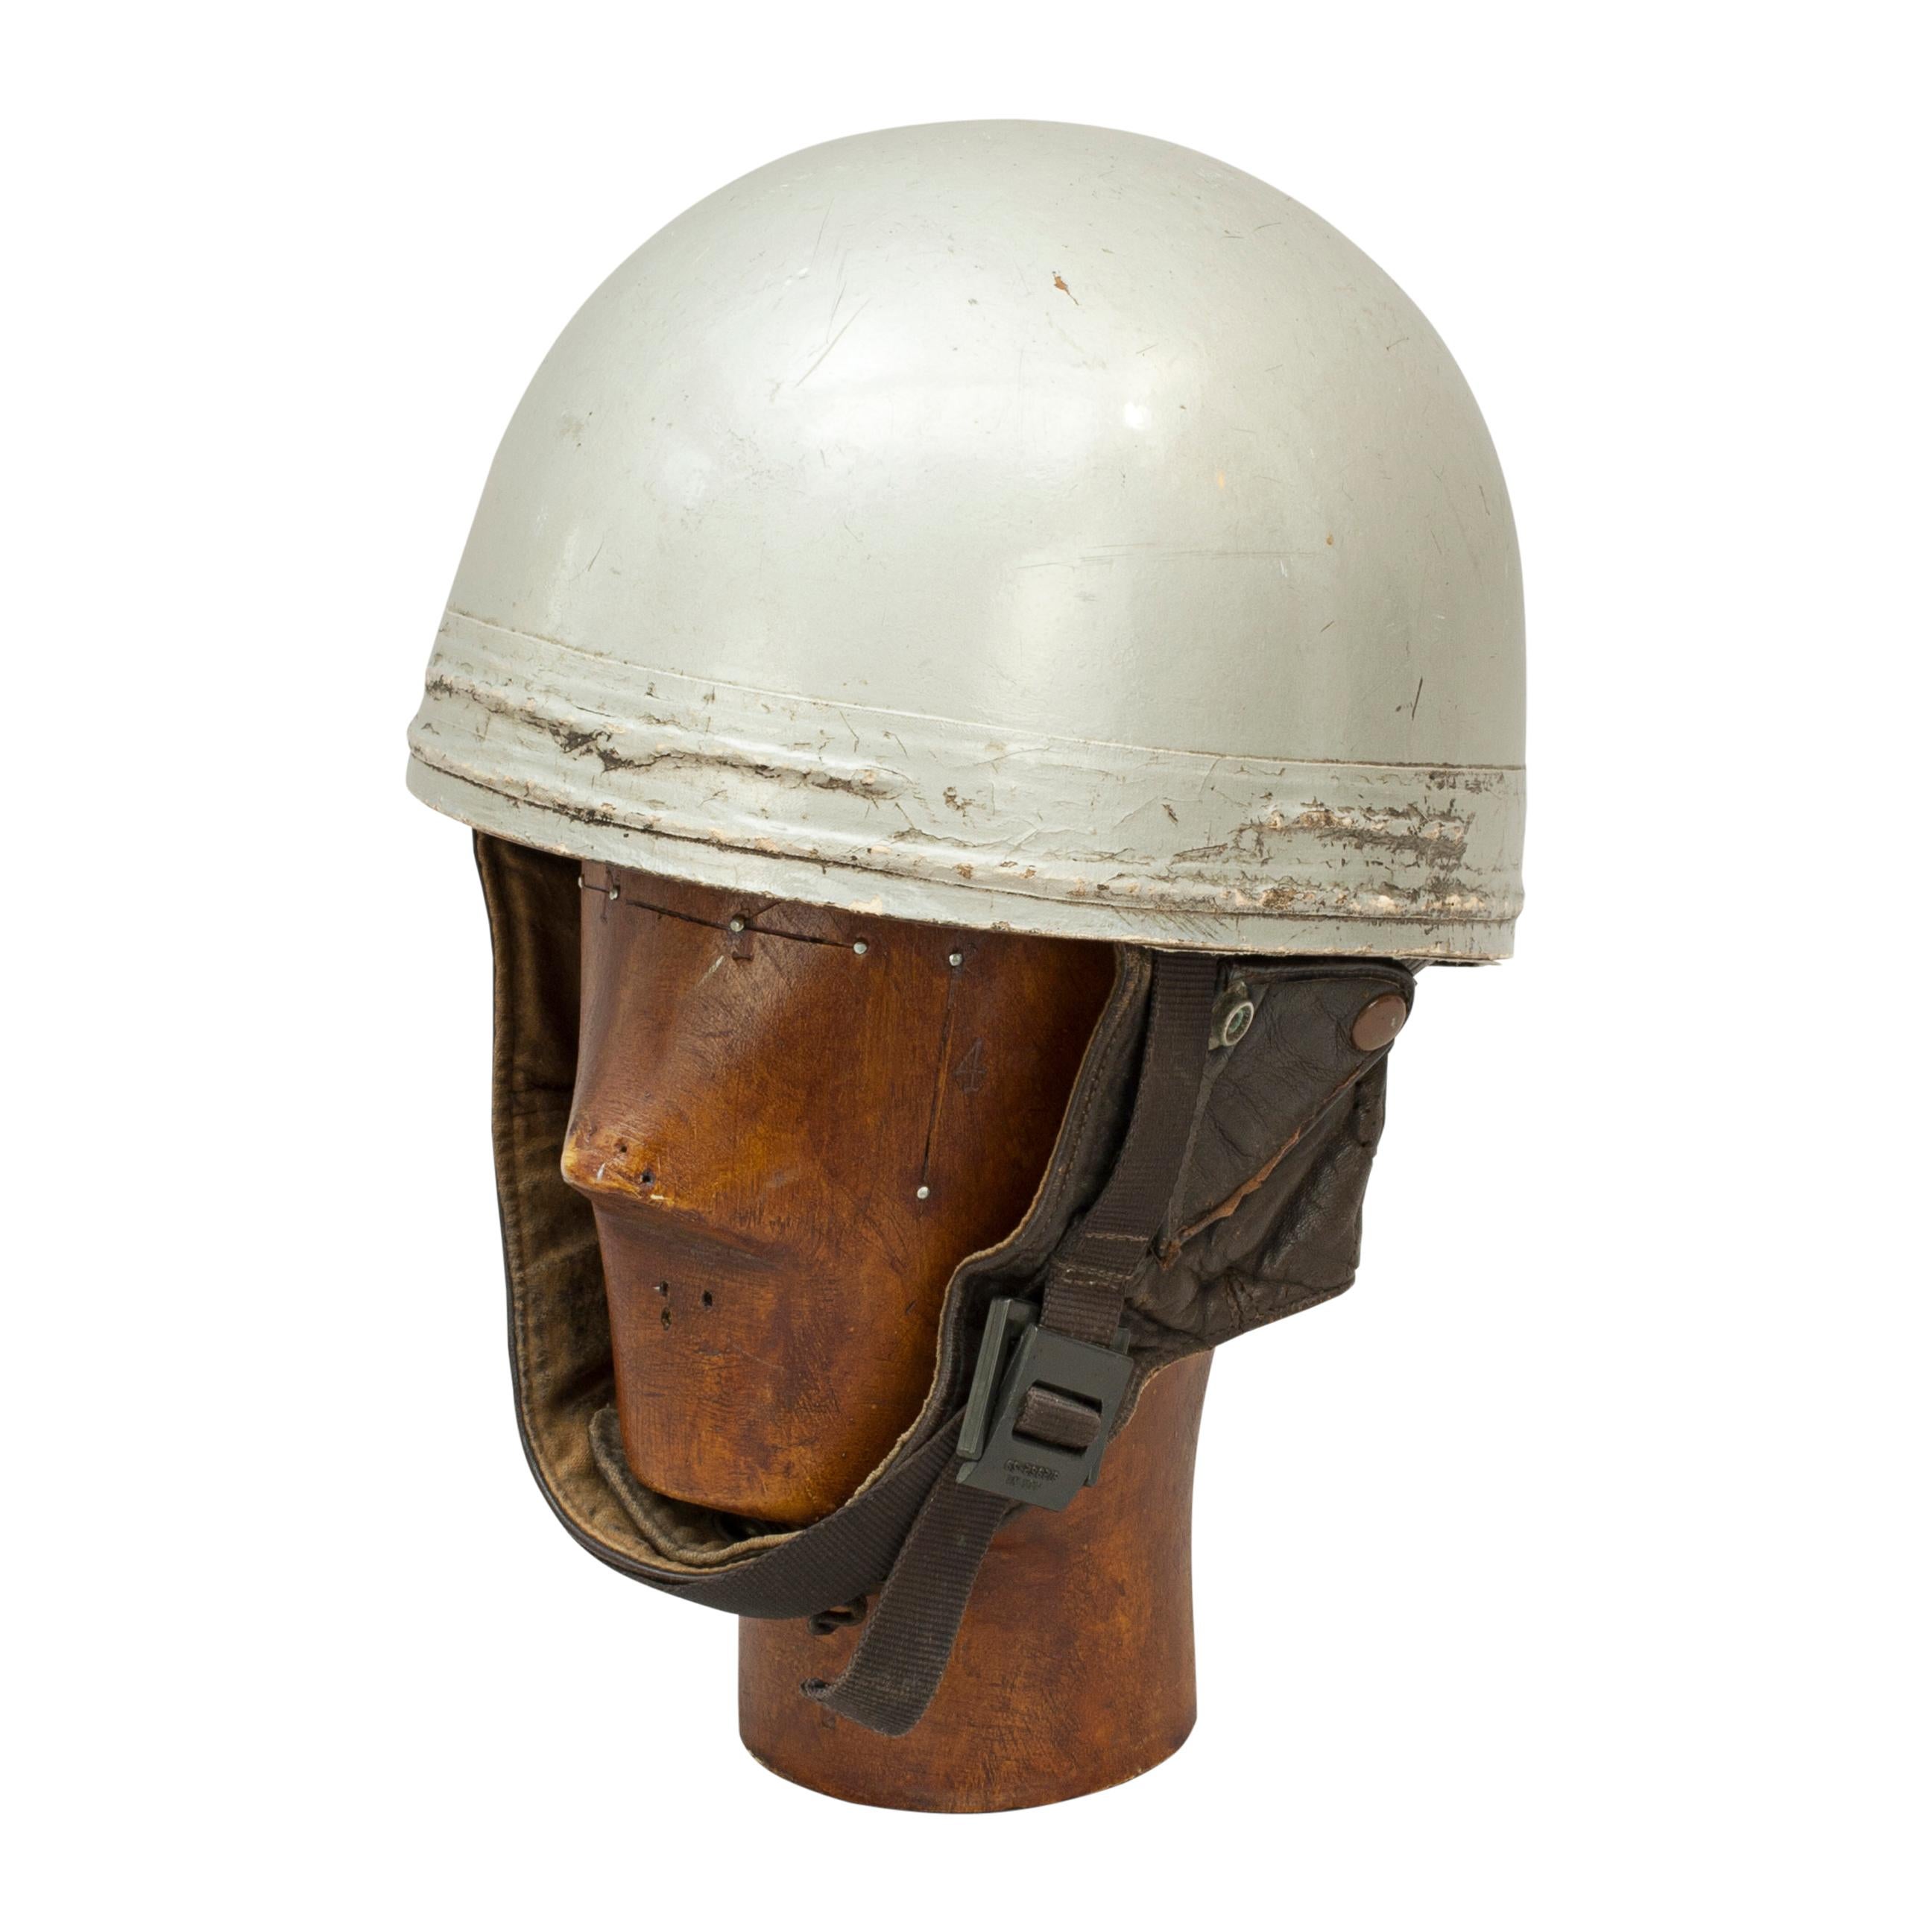 A.C.U approved Cromwell racing motorcycle crash helmet.
A silver painted motorcycle, pudding basin shape helmet made in England by Cromwell. This helmet has a cork interior, fitted with a fabric headband and straps keeping a space between the head